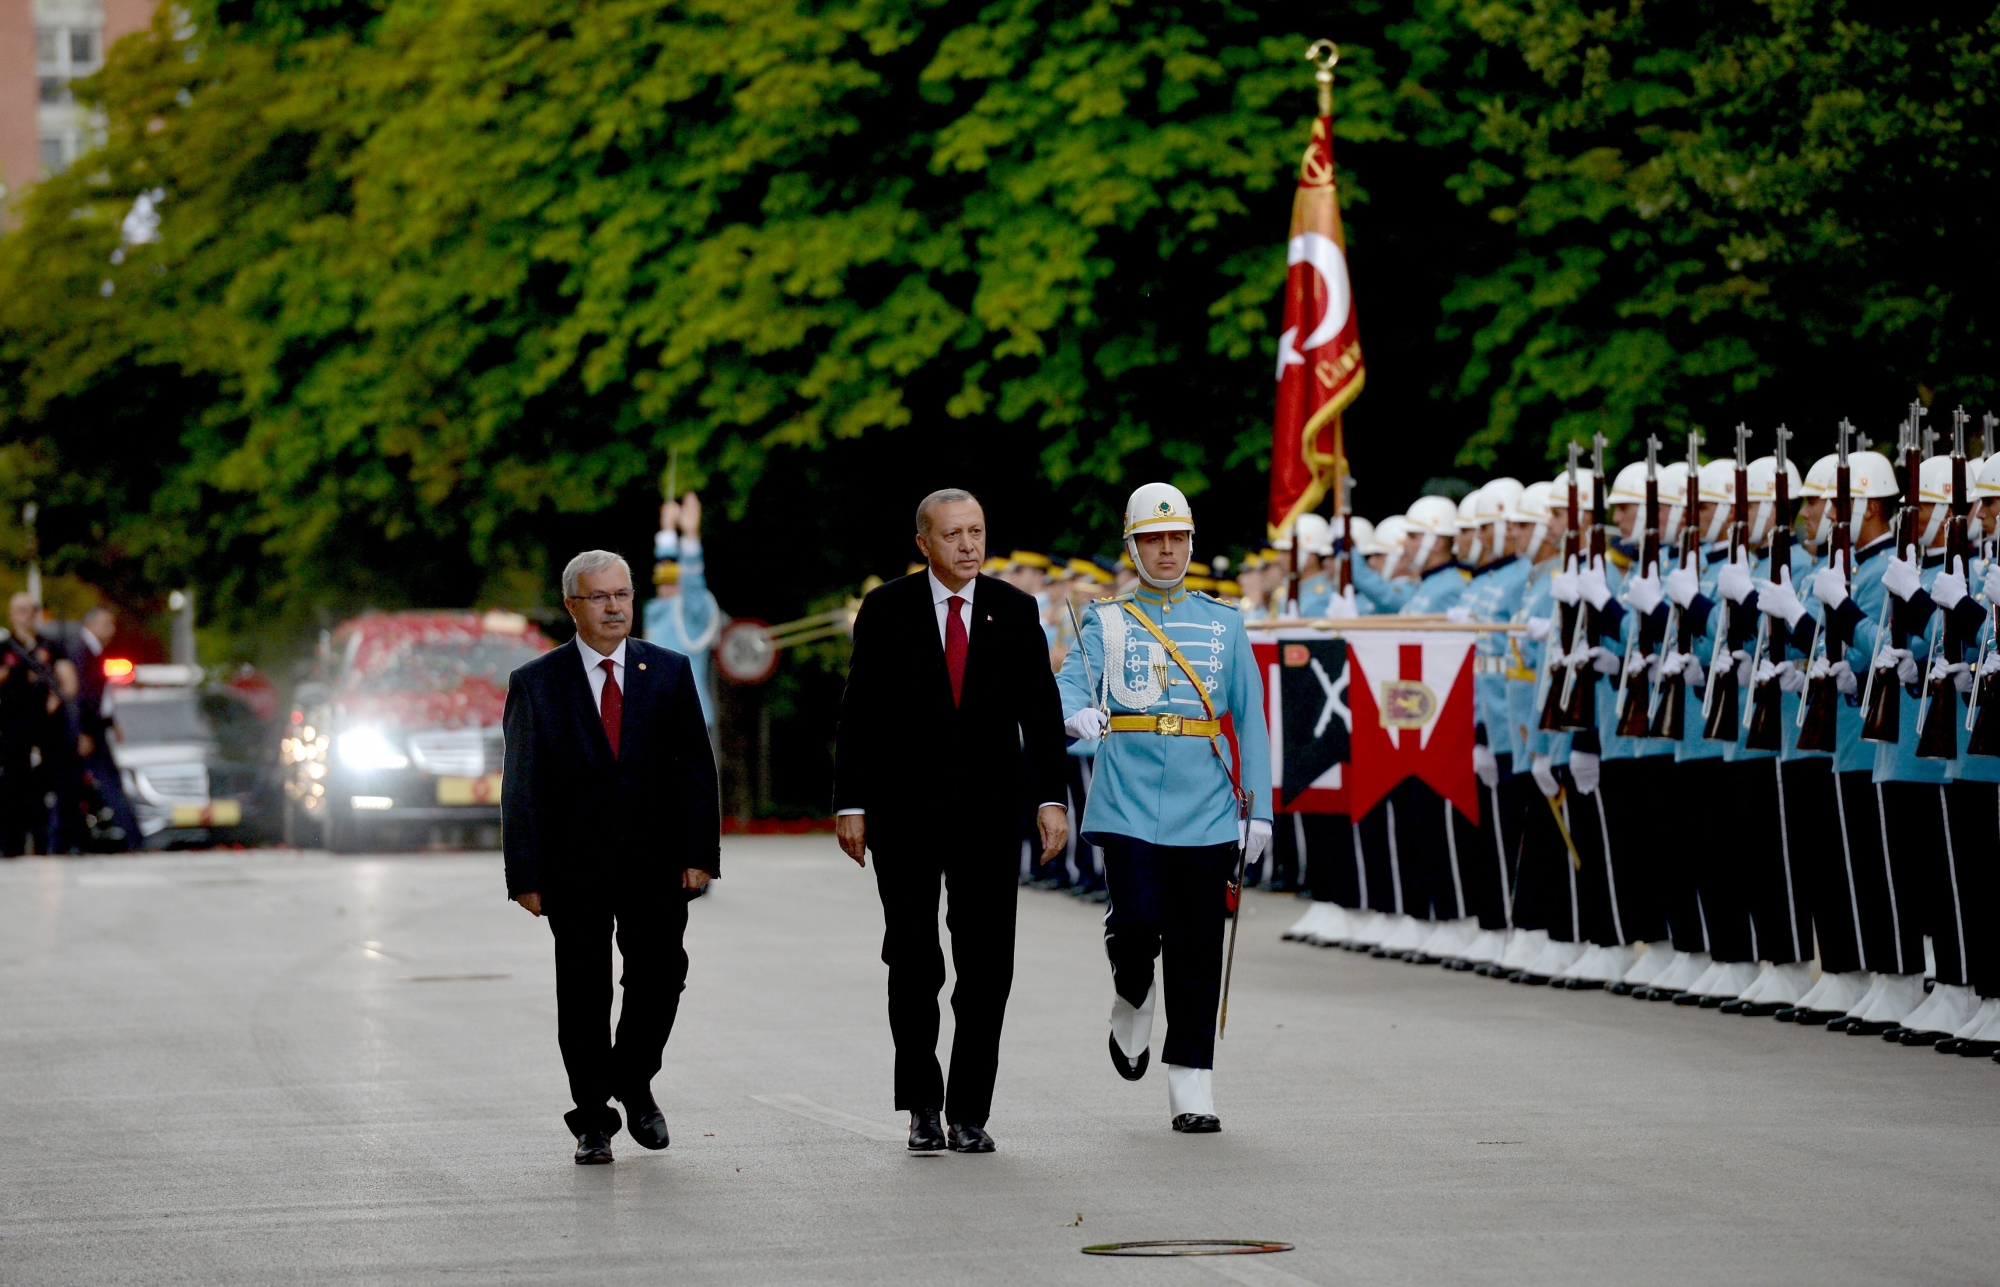 epa06875915 Turkish President Recep Tayyip Erdogan (C)  arrives at the Grand National Assembly of Turkey (TBMM) for his oath before the new Legislative Year of the 27th Term and oath ceremony at Grand National Assembly of Turkey in Ankara, Turkey, 09 July 2018.  EPA/STR TURKEY NEW LAGISLATIVE YEAR